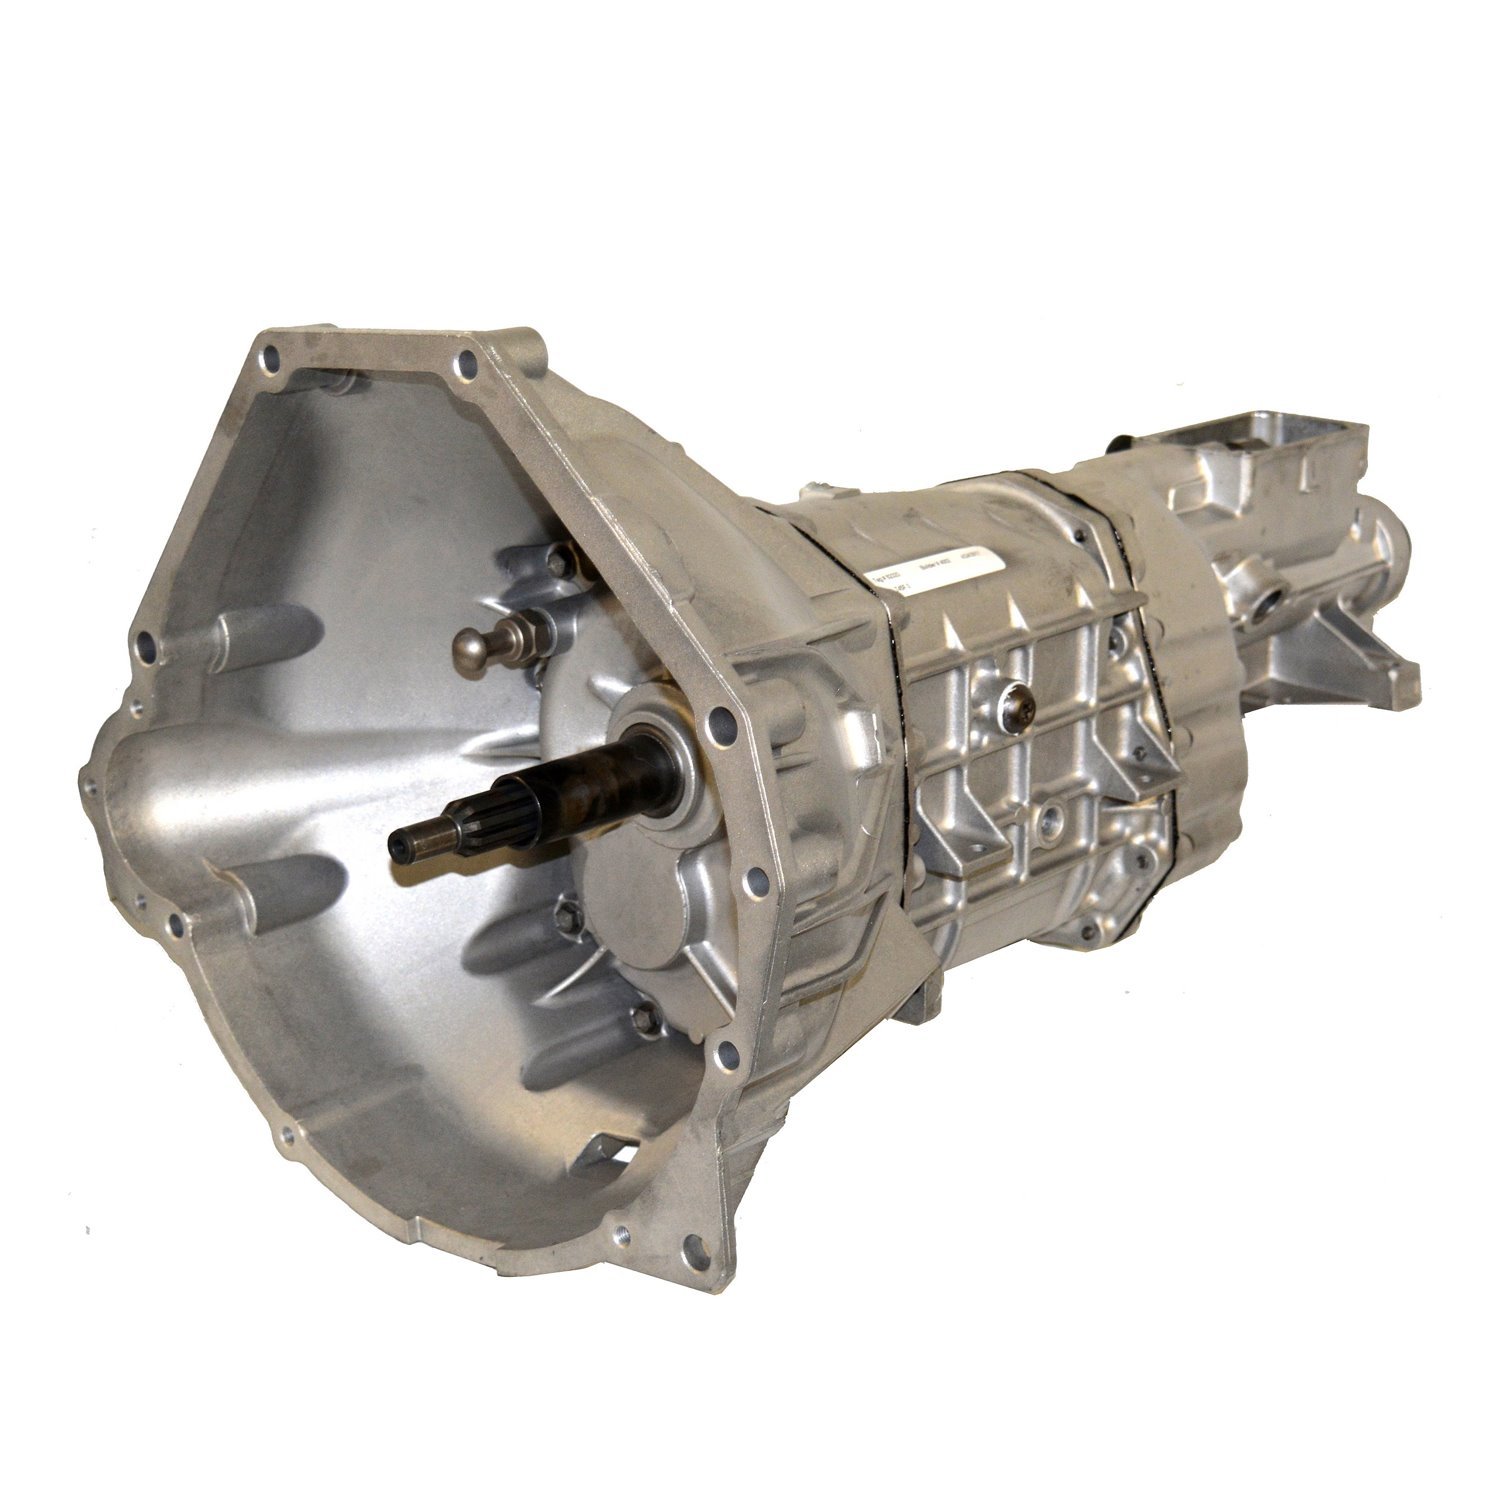 Remanufactured FM145 Manual Transmission for Ford 96-98 Mustang Cobra 4.6L, 5 Speed